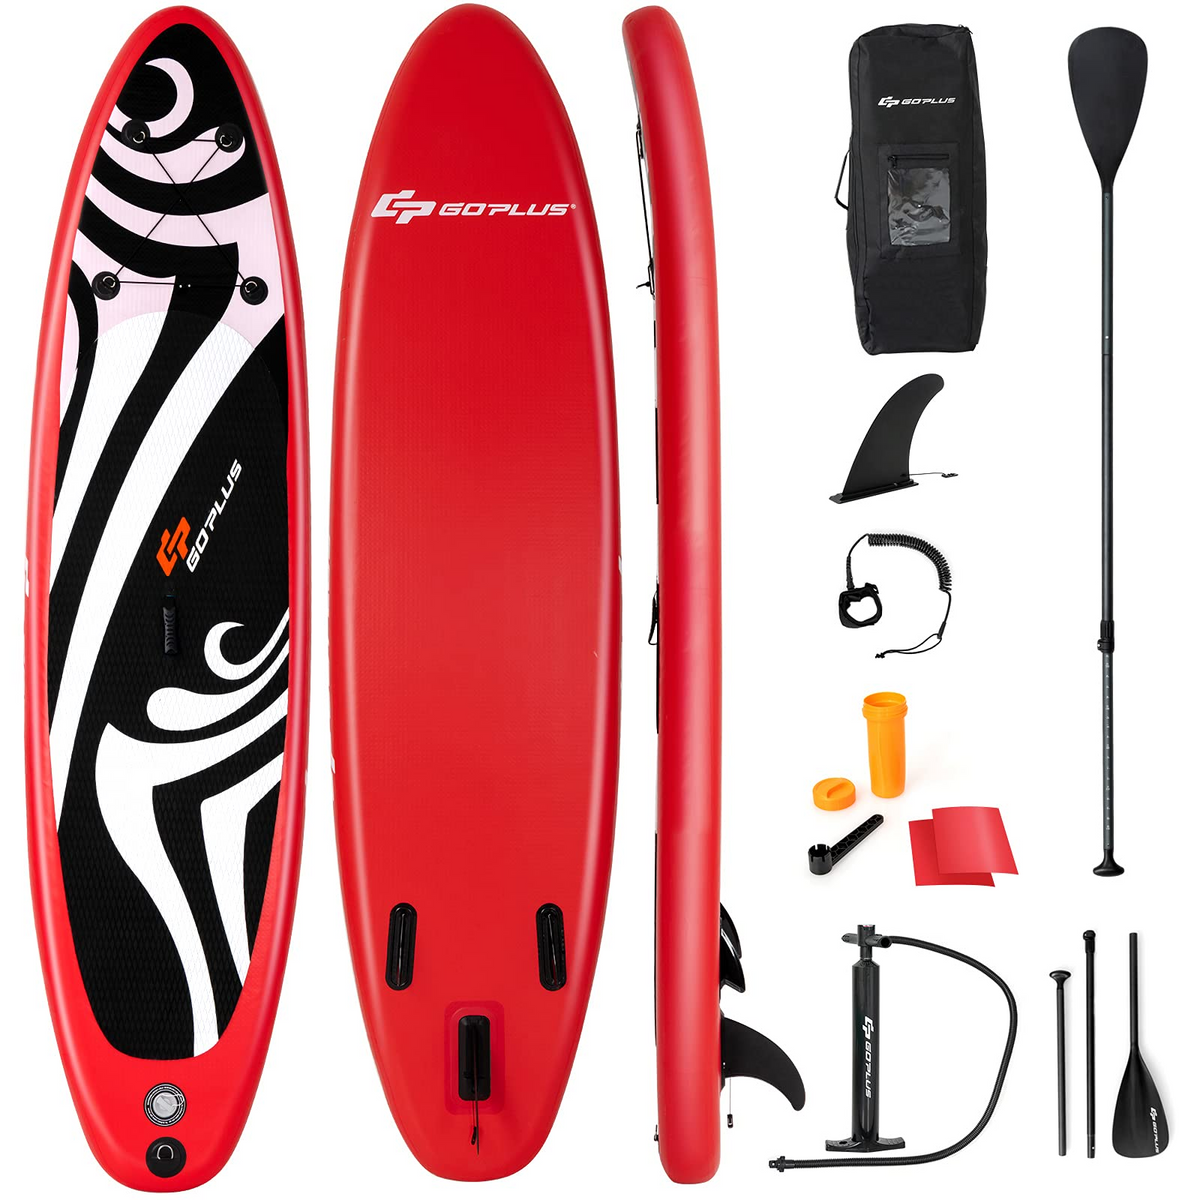 Goplus Inflatable Stand up Paddle Board Surfboard SUP Board (Red, 10FT) - GoplusUS